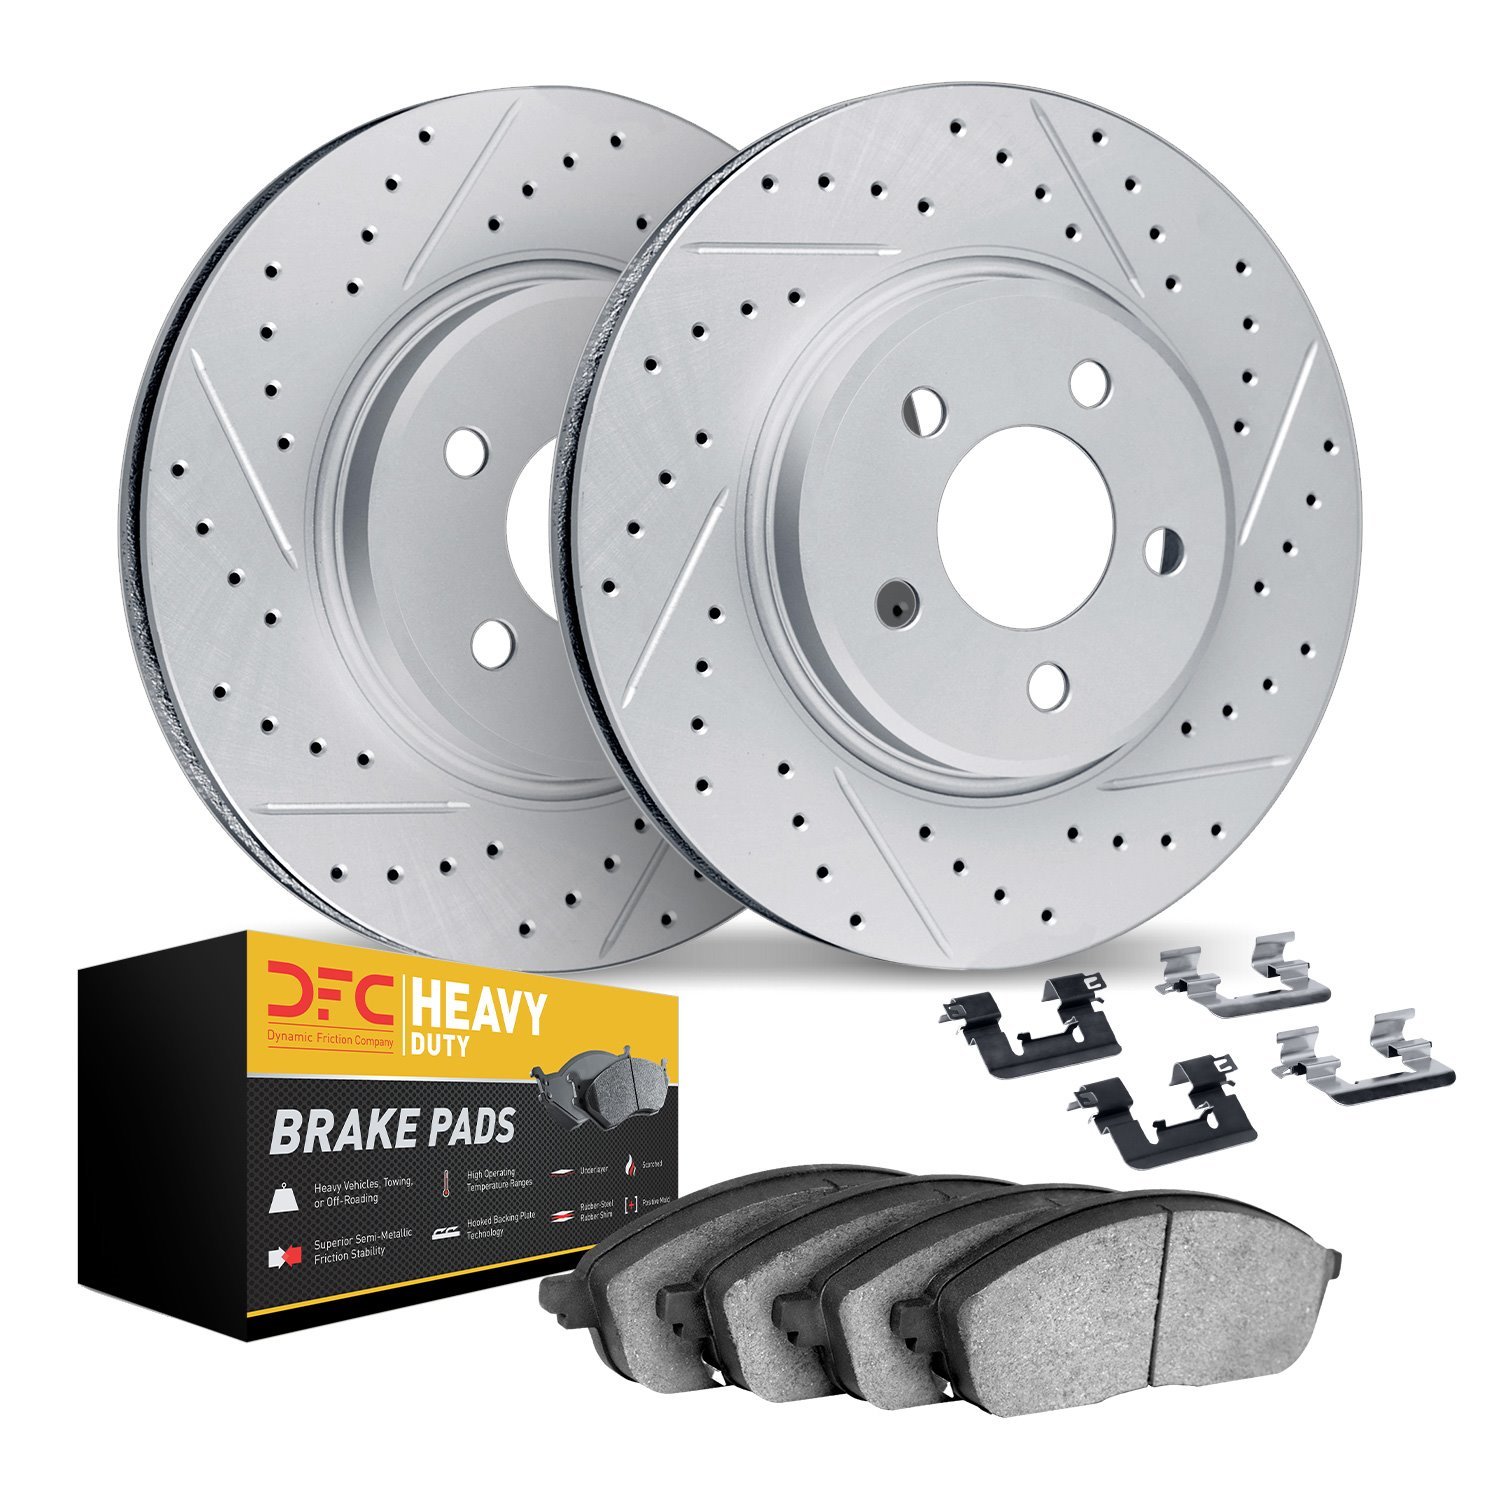 2212-48002 Geoperformance Drilled/Slotted Rotors w/Heavy-Duty Pads Kit & Hardware, 1997-2005 GM, Position: Front